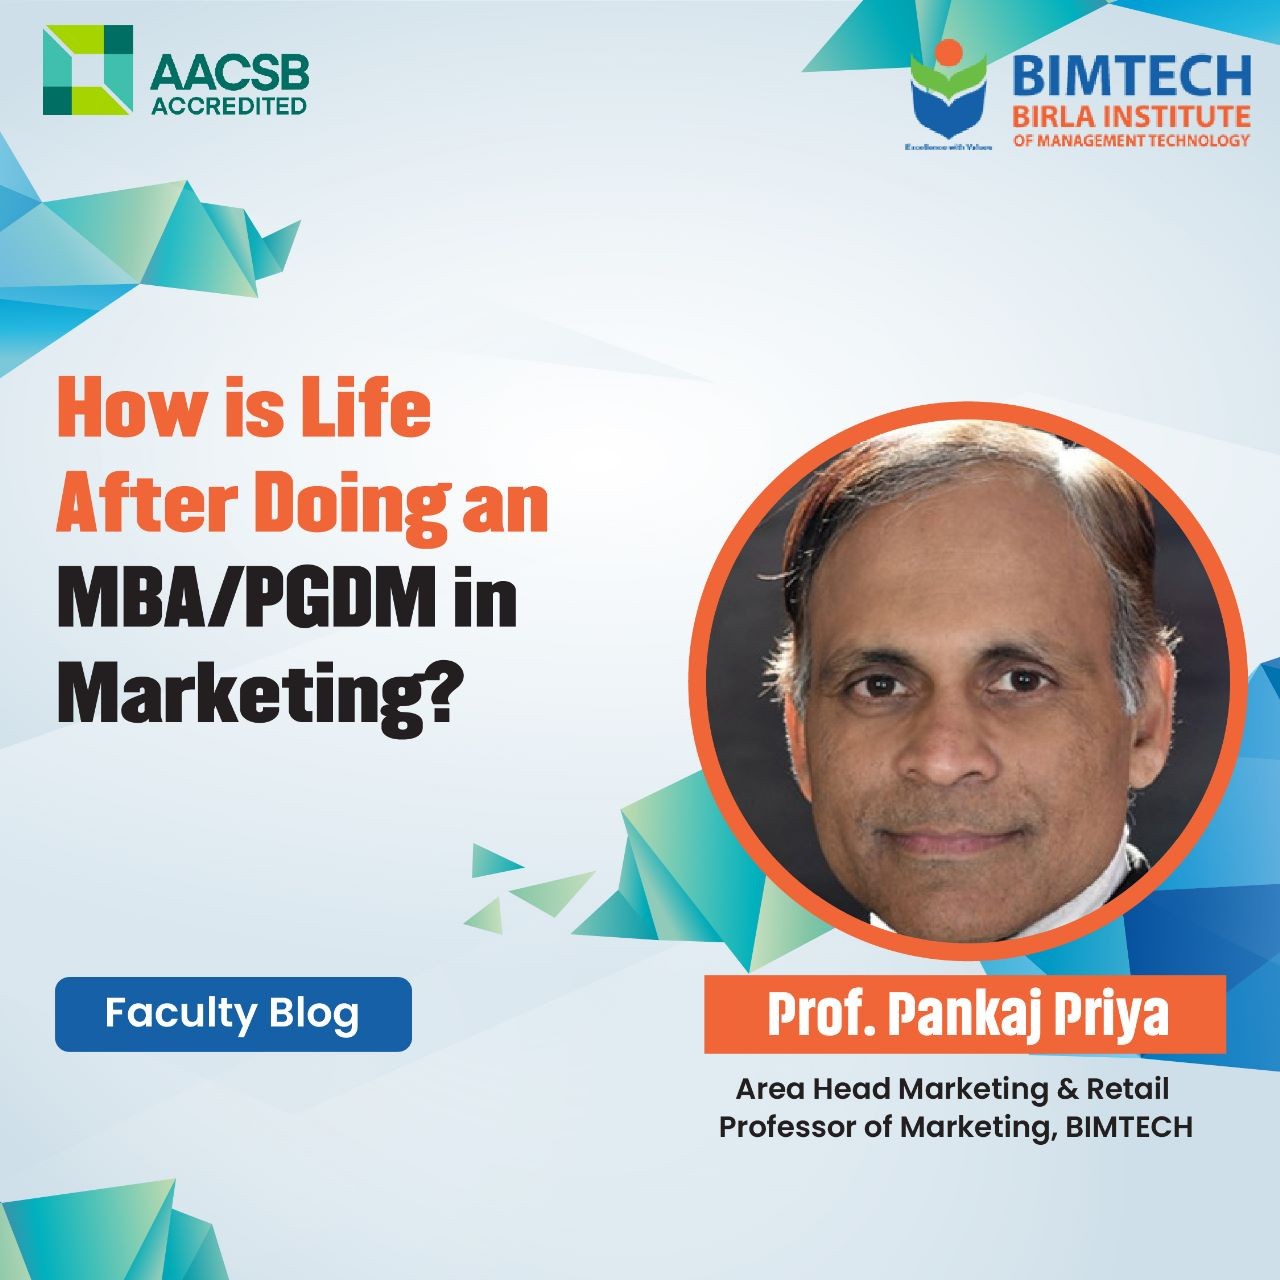 How is Life After Doing an MBA/PGDM in Marketing?